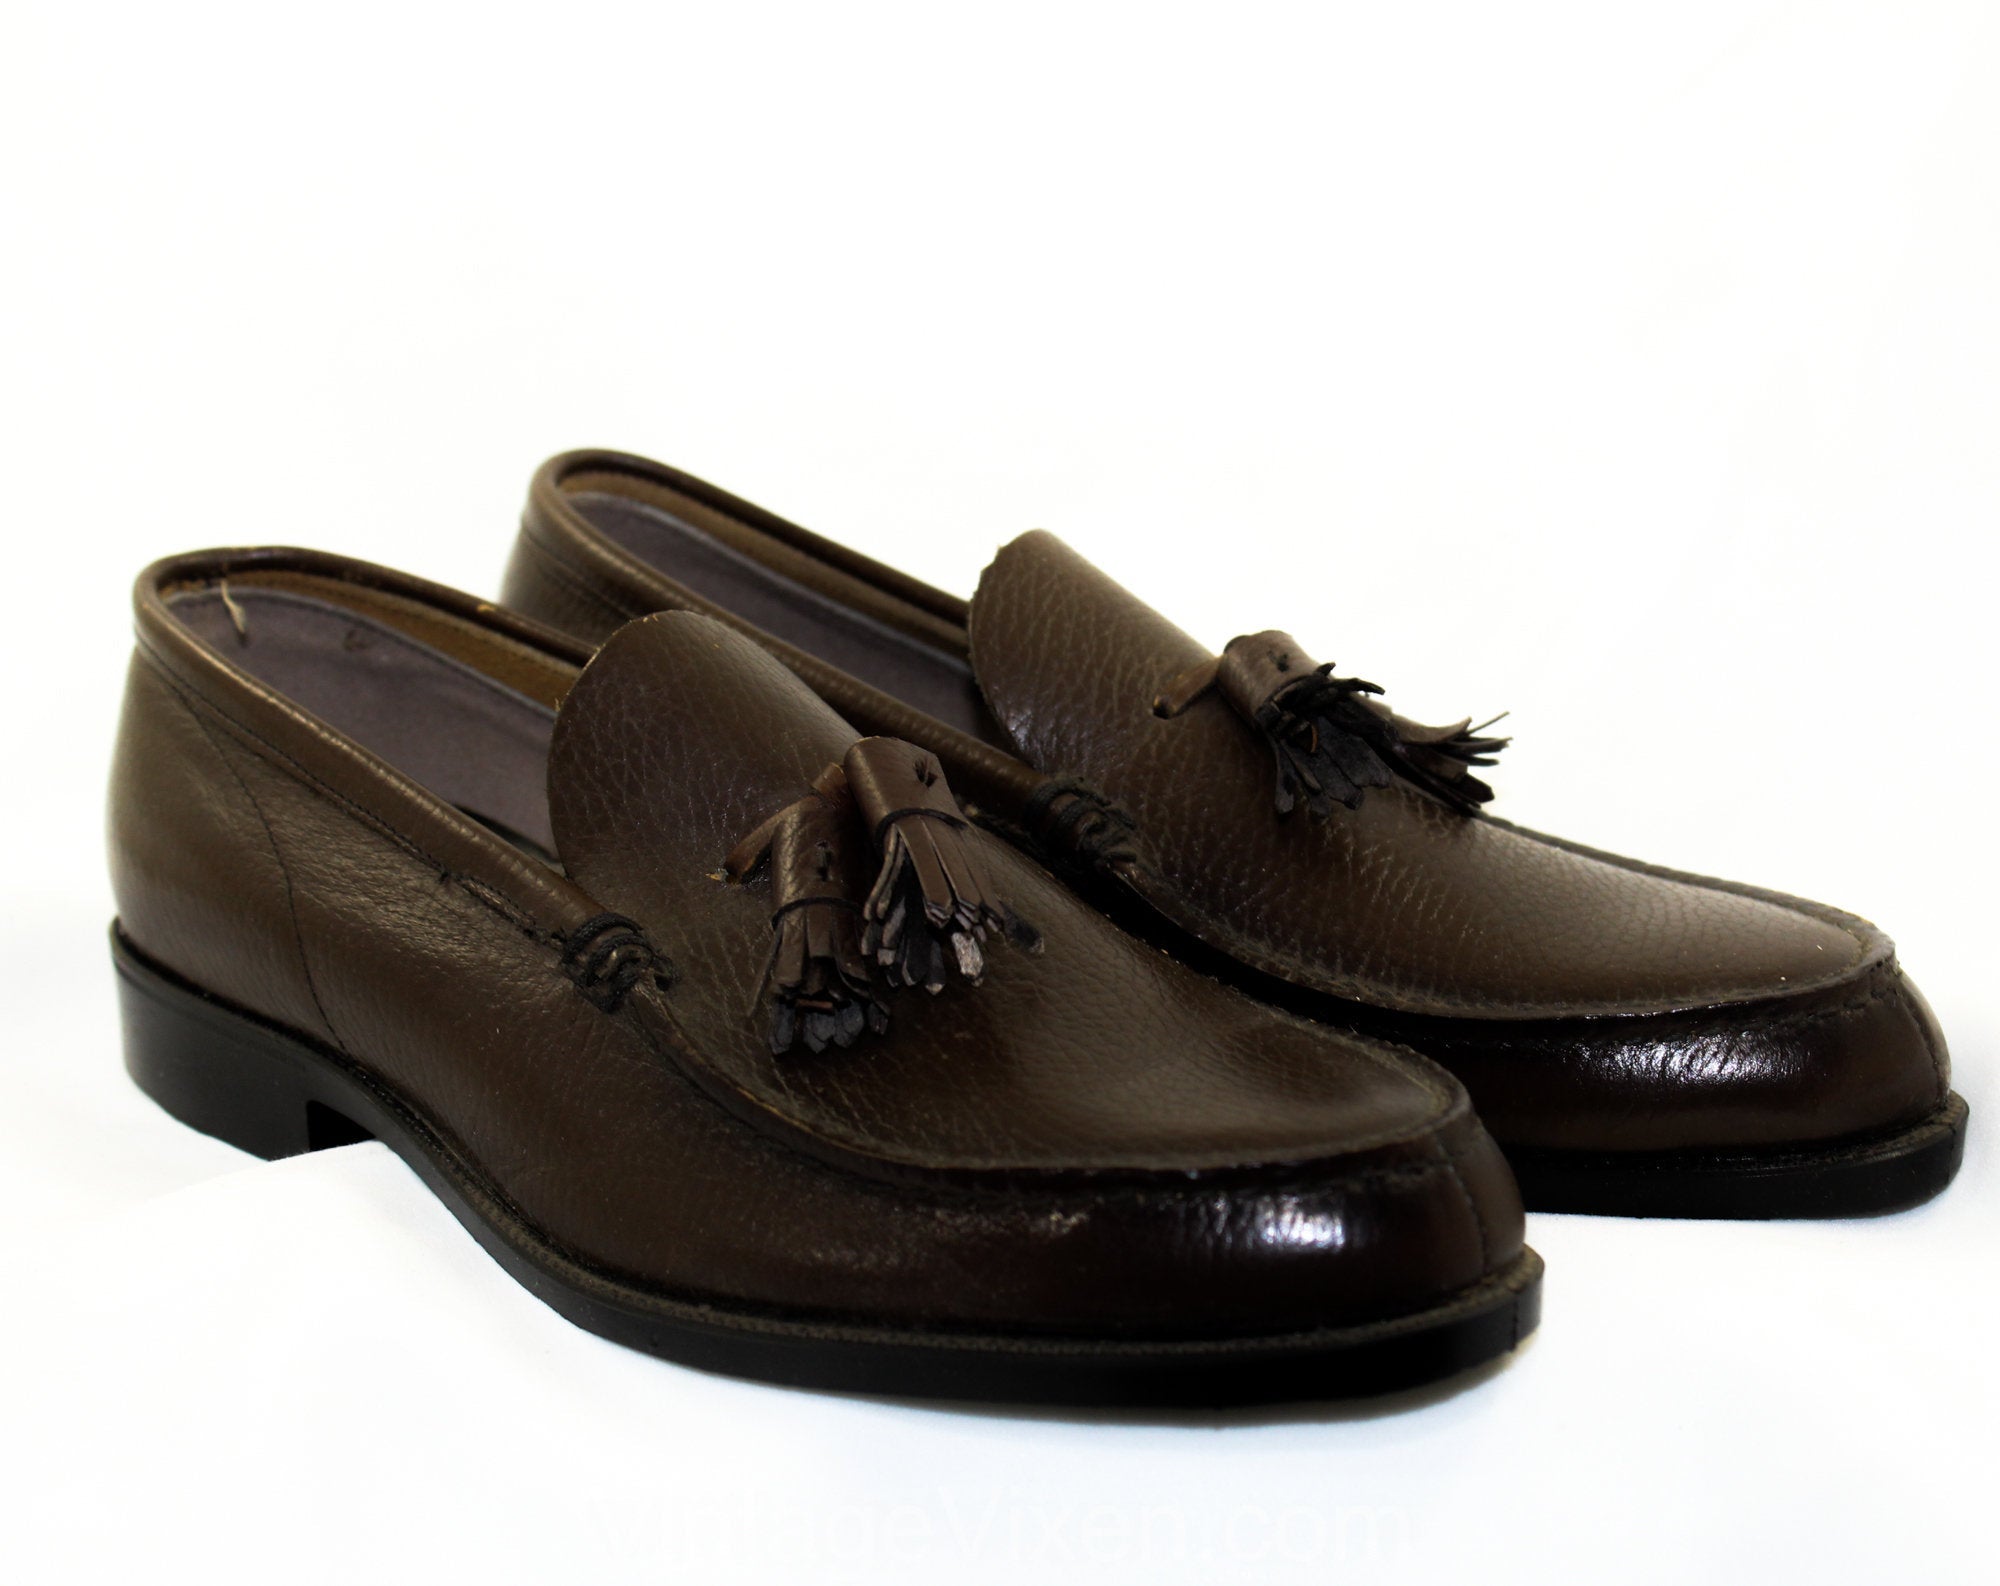 Men's Size 5 1/2 Shoes - 1950s Brown Leather Mens Loafers with Classic ...